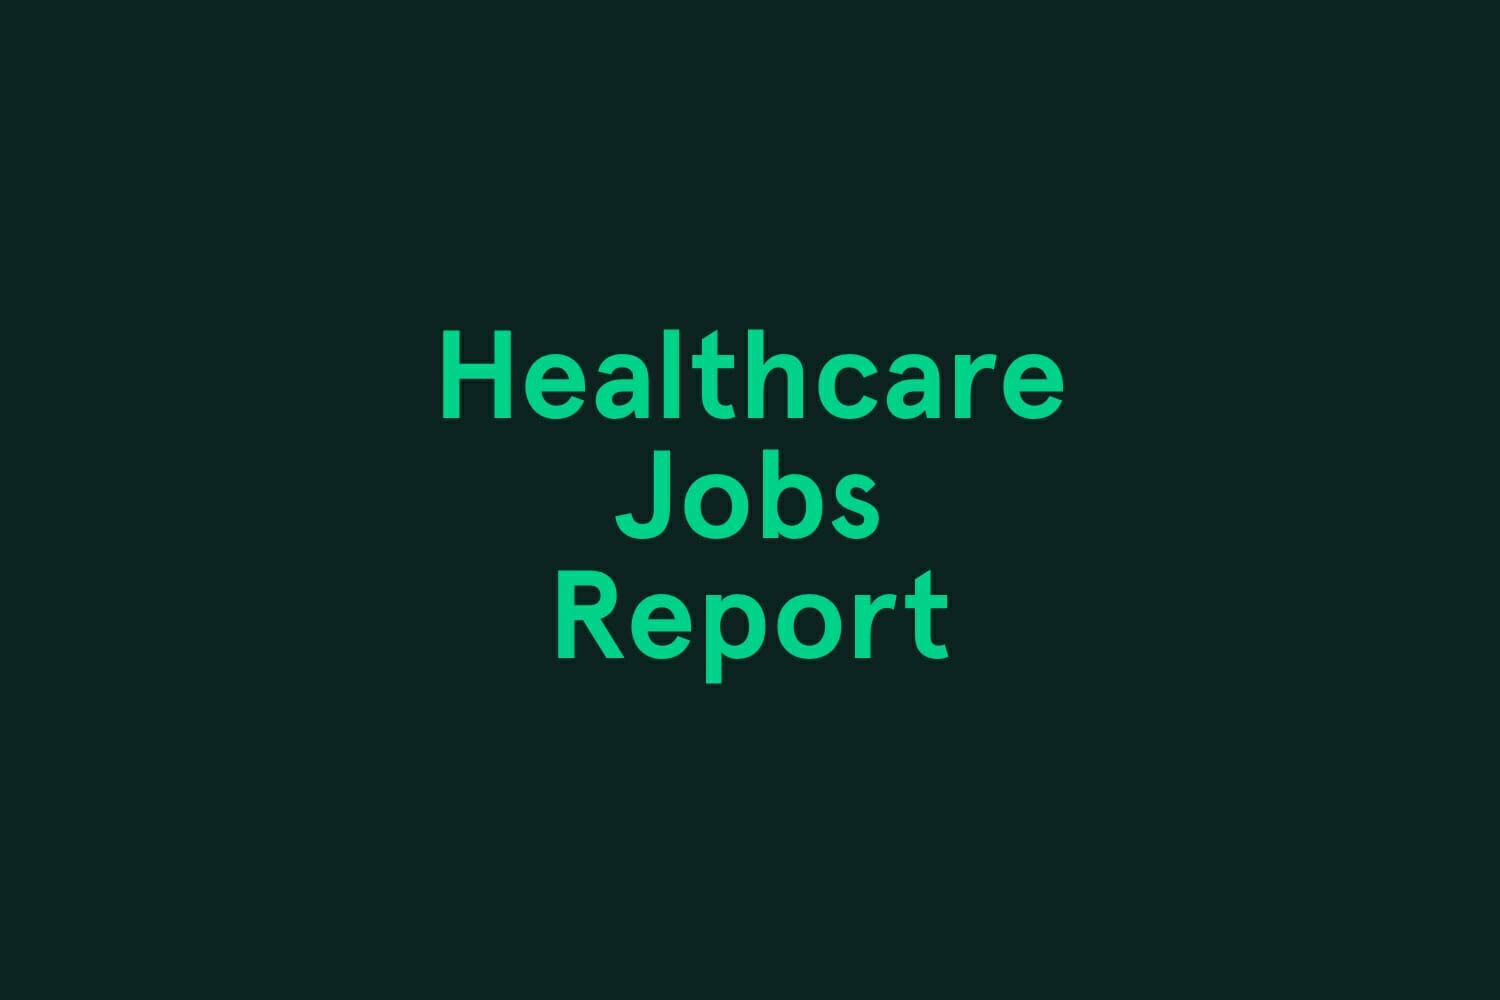 July Healthcare Jobs Report Infographic